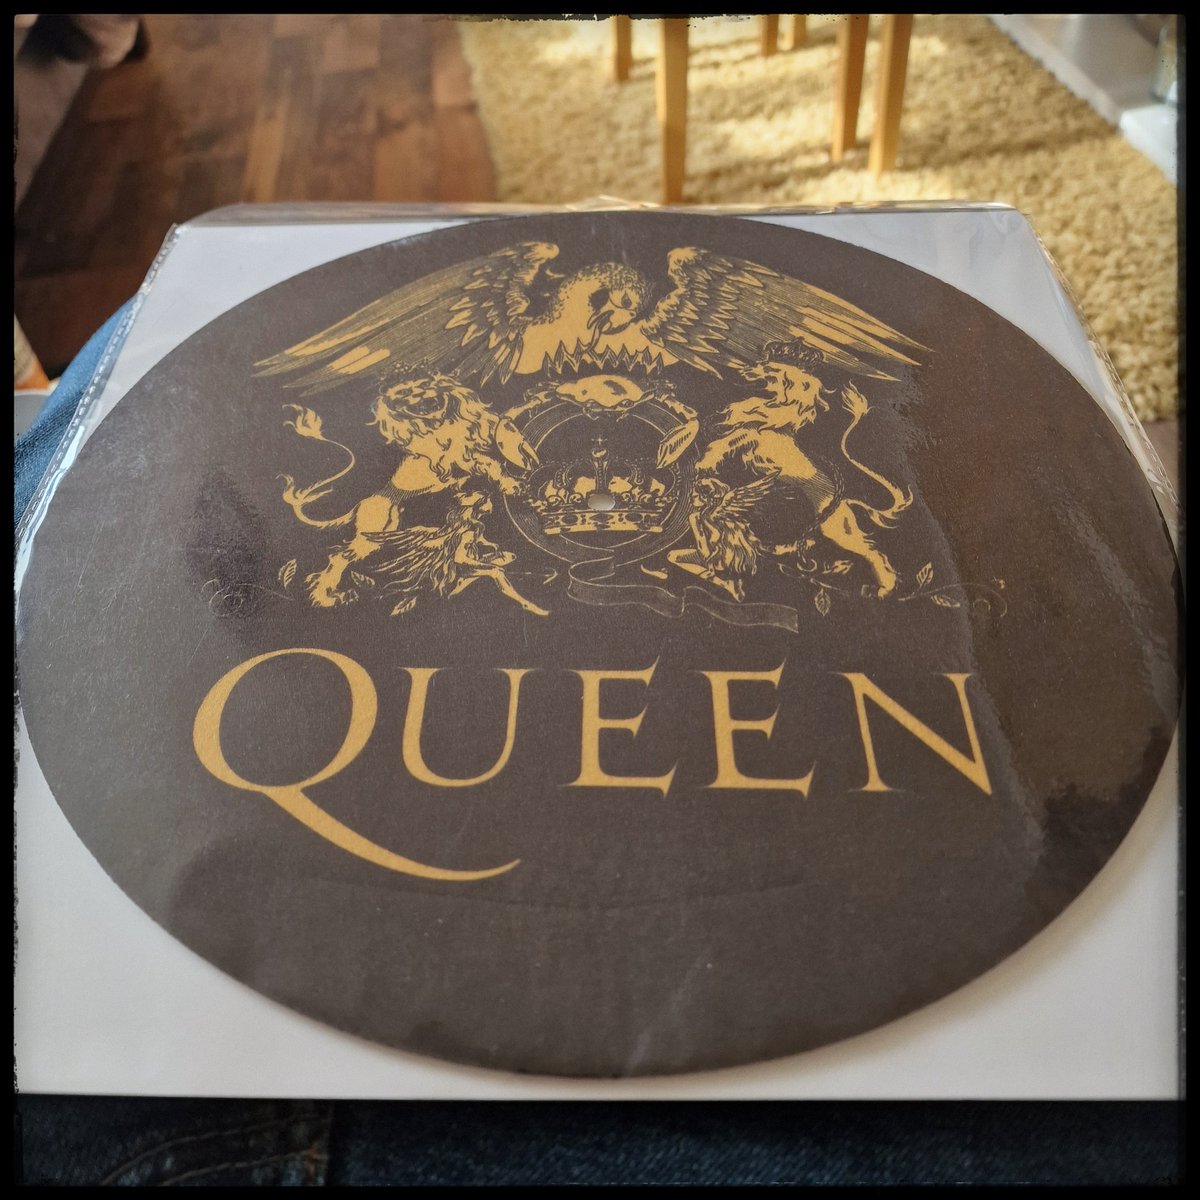 Treated myself to a @QueenWillRock slip mat today. 👌👌

#WeWillRockYou #Queen